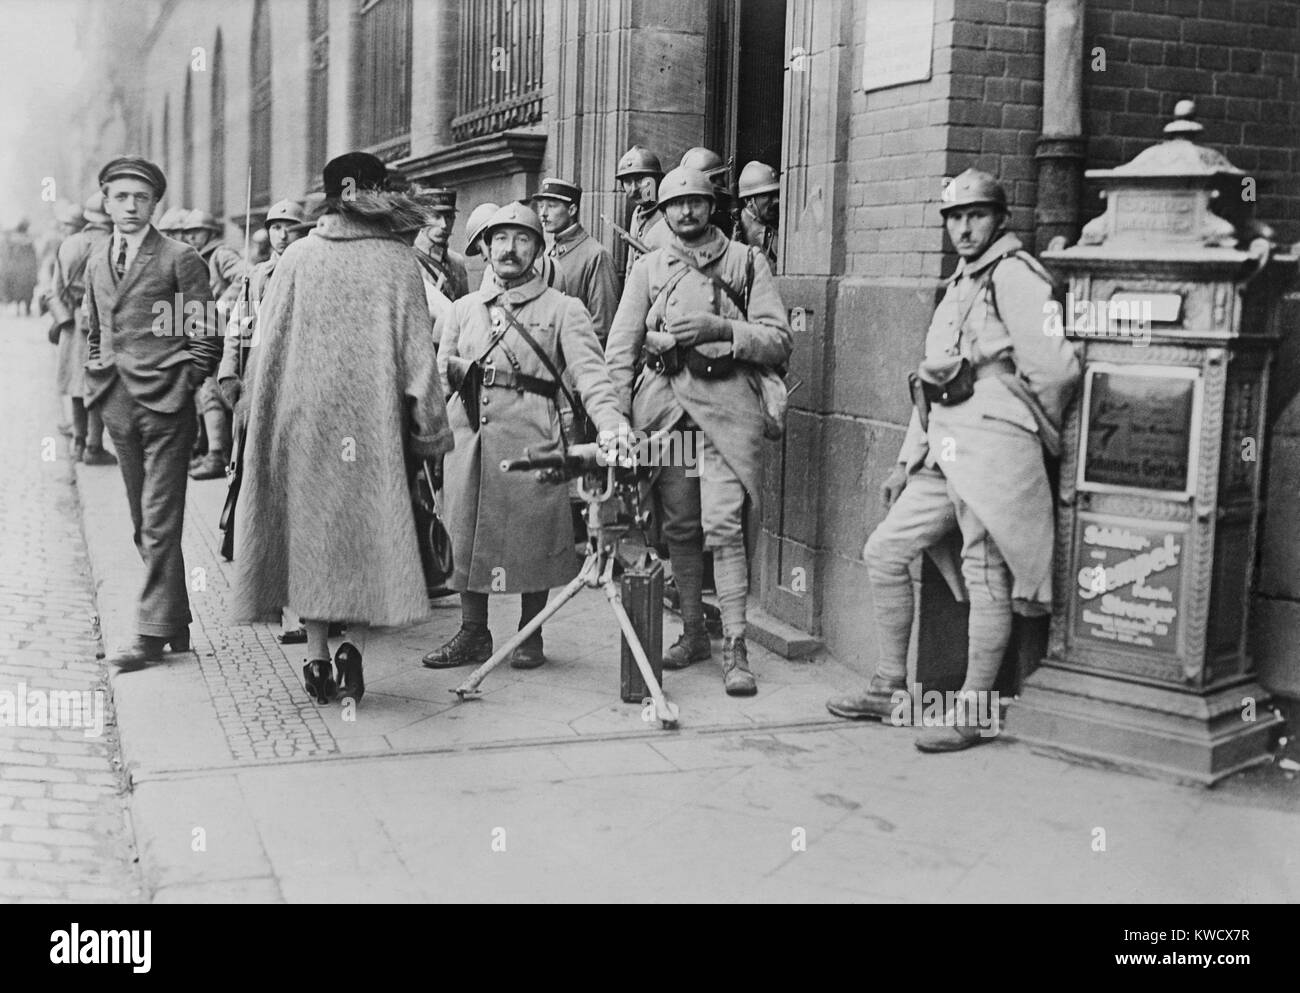 French soldiers with a machine gun stationed at the post office in Essen, Germany, 1923. The occupation lasted until August 1925. The German industrial giant, Krupp was headquartered in the city and was the site of resistance and violence in March 1923 (BSLOC 2017 2 63) Stock Photo